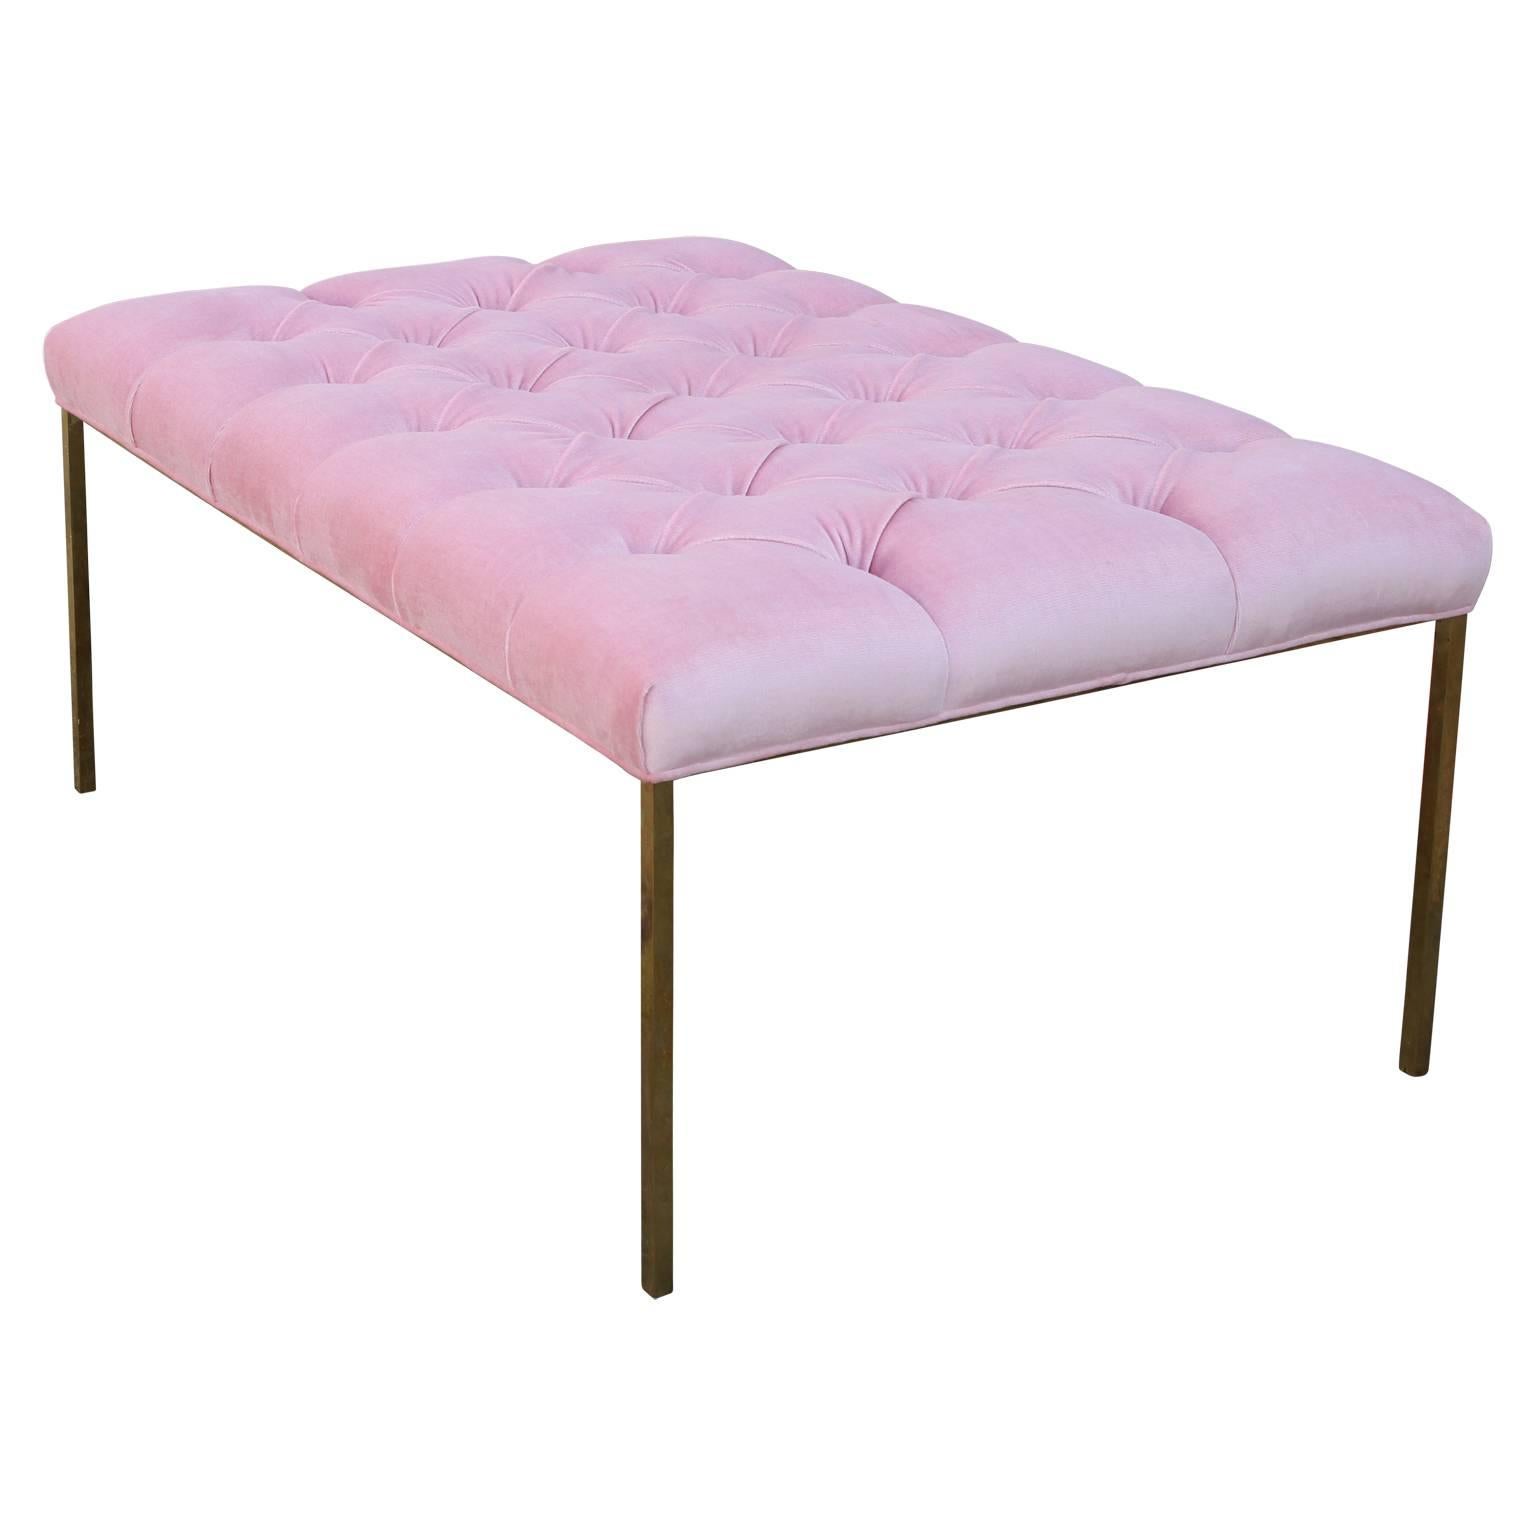 Rectangular bench or ottoman with a brass frame and in a lush light pink tufted Kravet velvet. The brass has a nice natural patina.